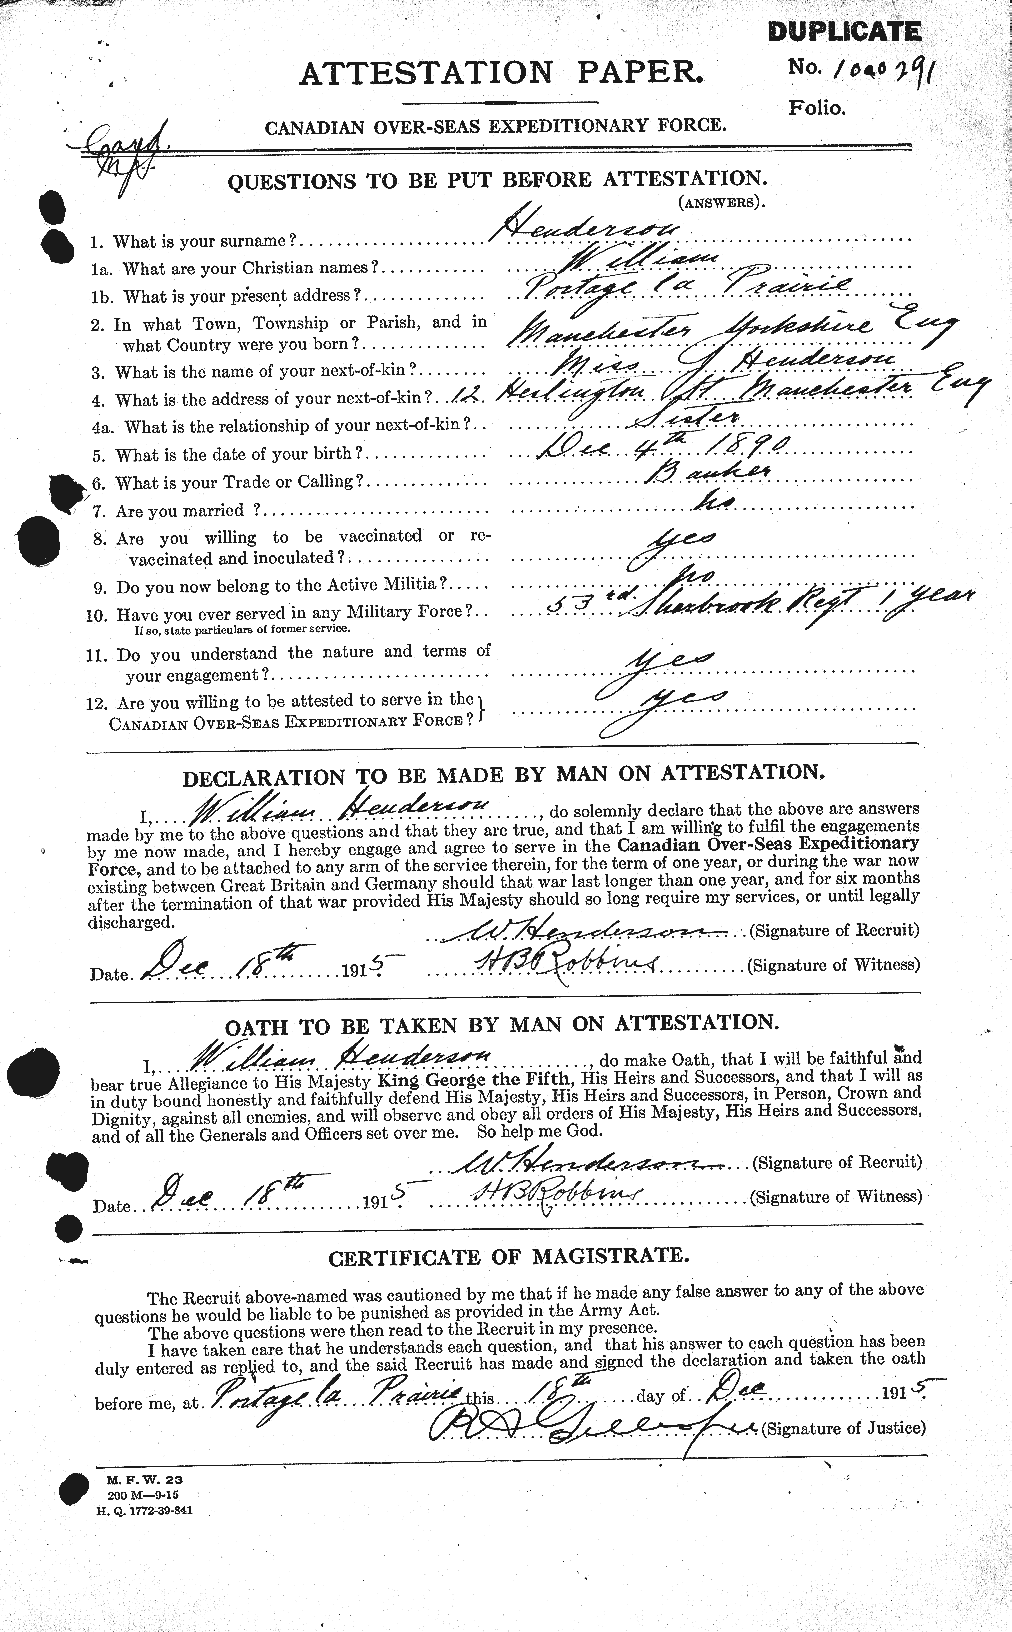 Personnel Records of the First World War - CEF 388991a